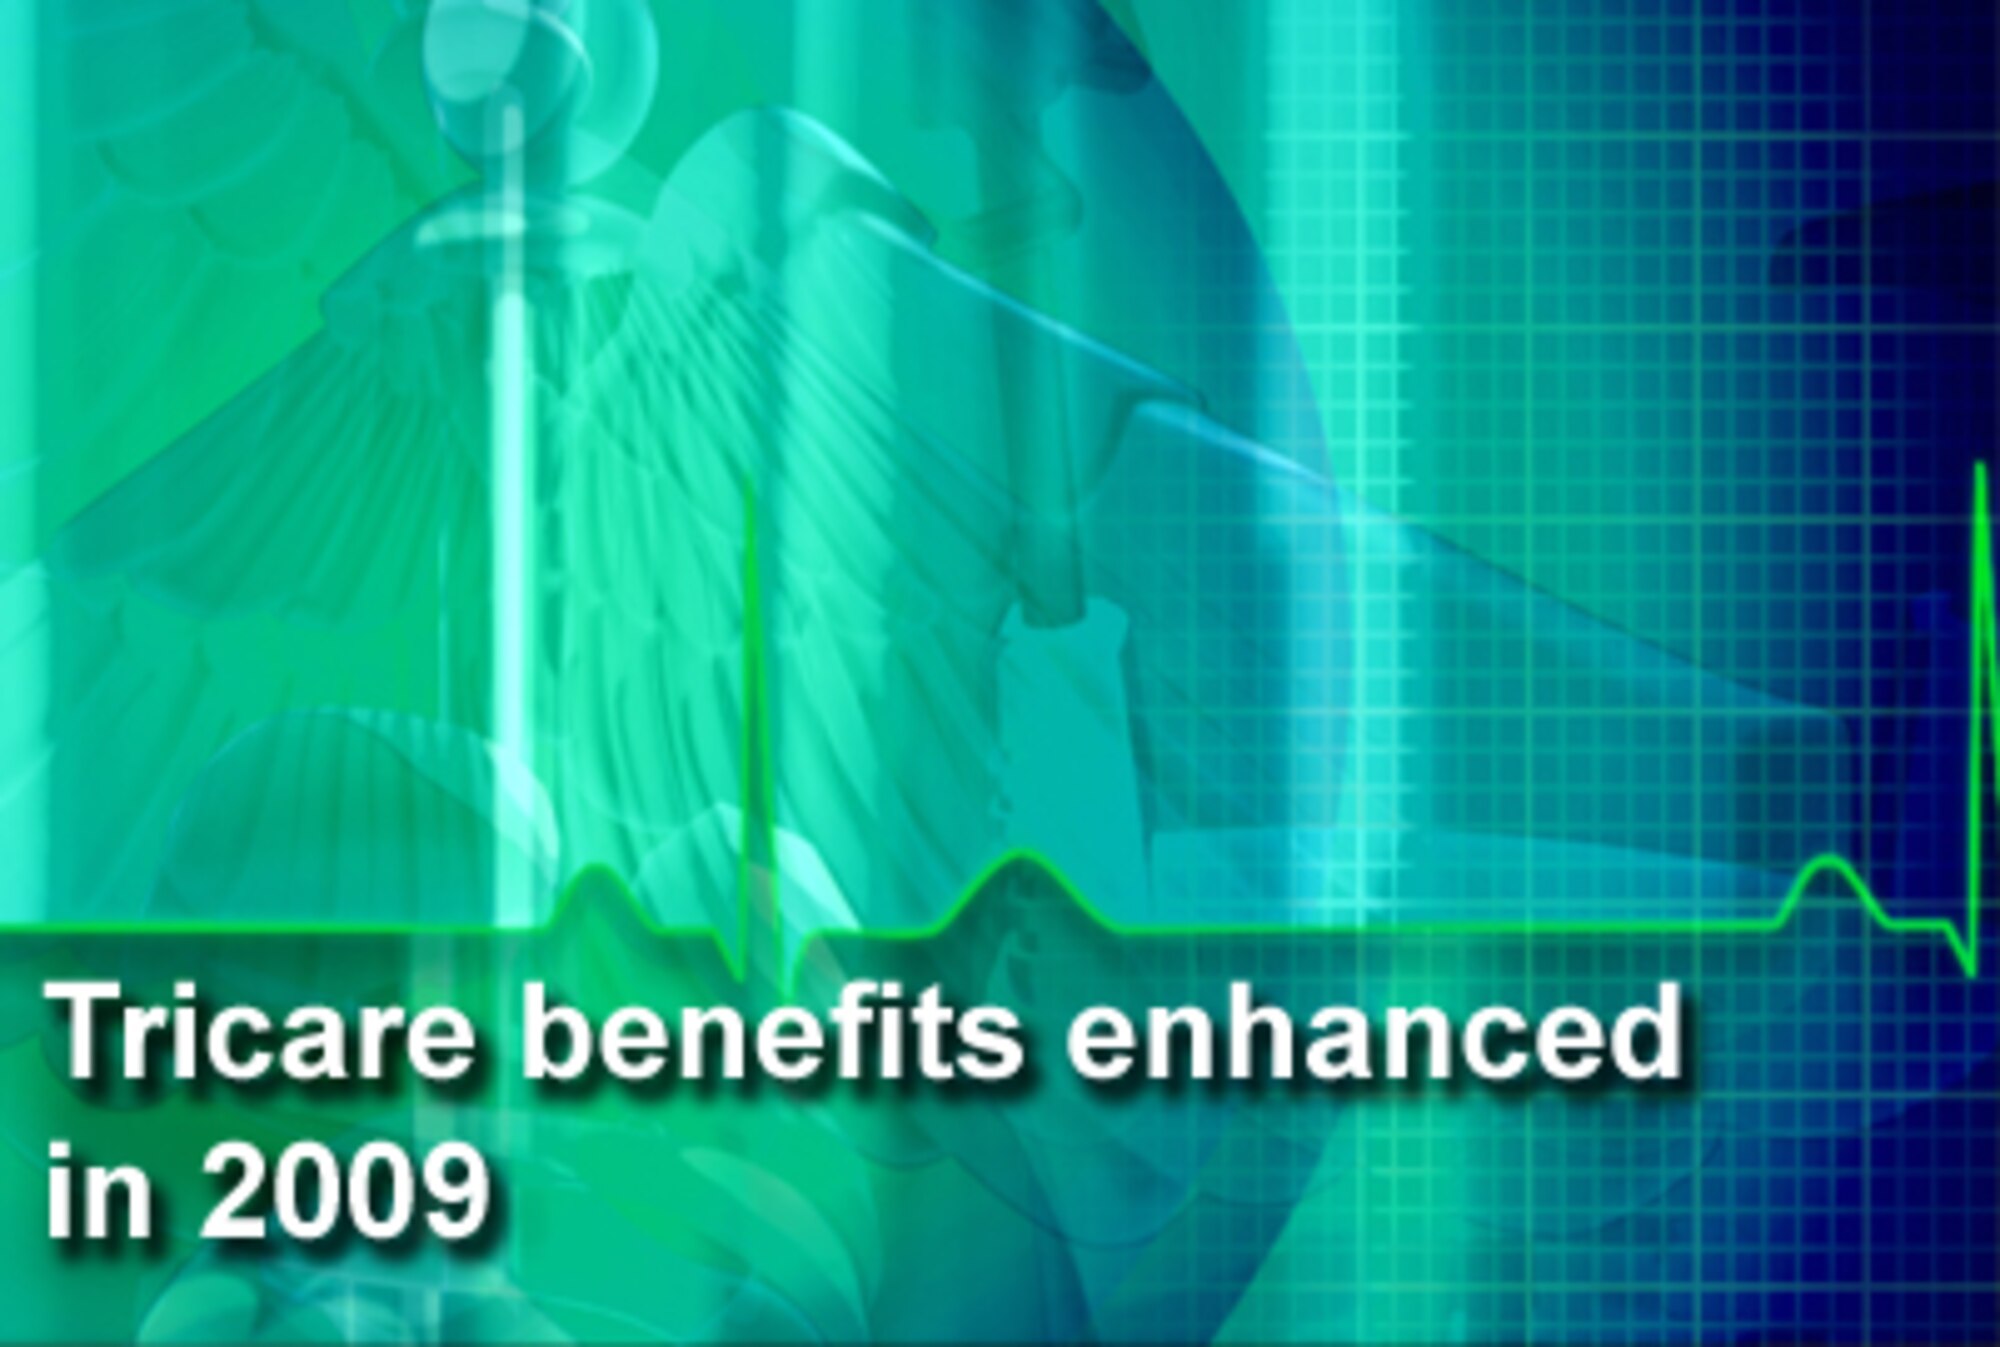 Tricare officials had a busy year as they expanded benefits and customer service in 2009.  (U.S. Air Force graphic)